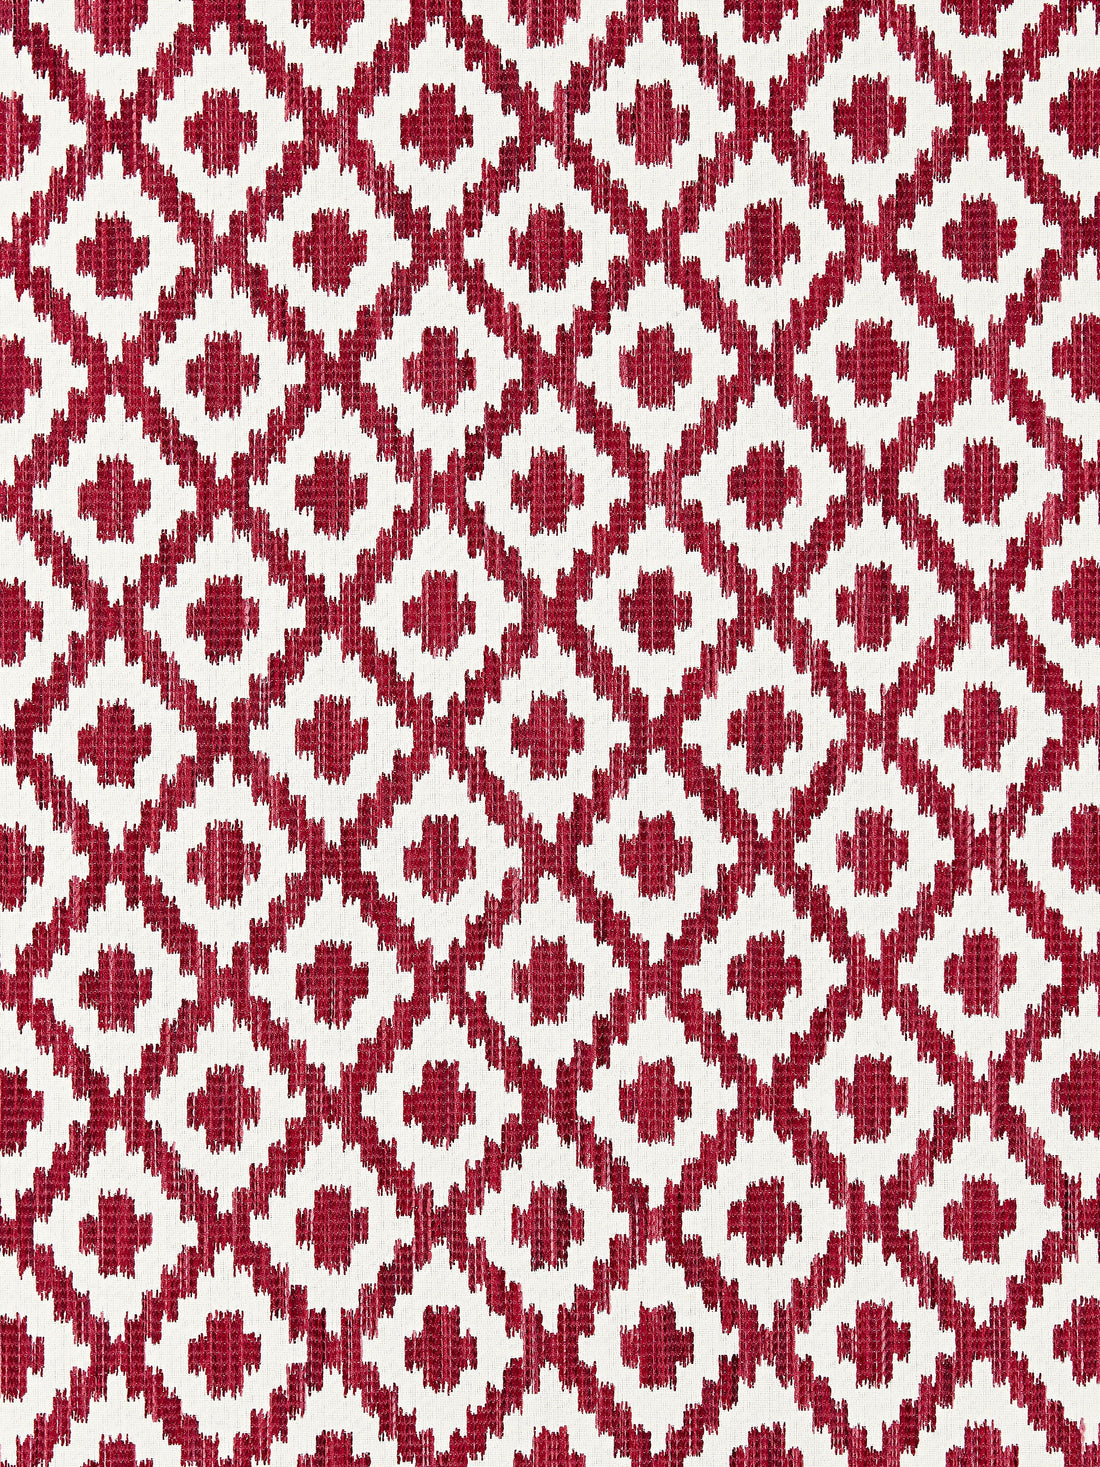 Malay Ikat Weave fabric in raspberry color - pattern number SC 000327098 - by Scalamandre in the Scalamandre Fabrics Book 1 collection